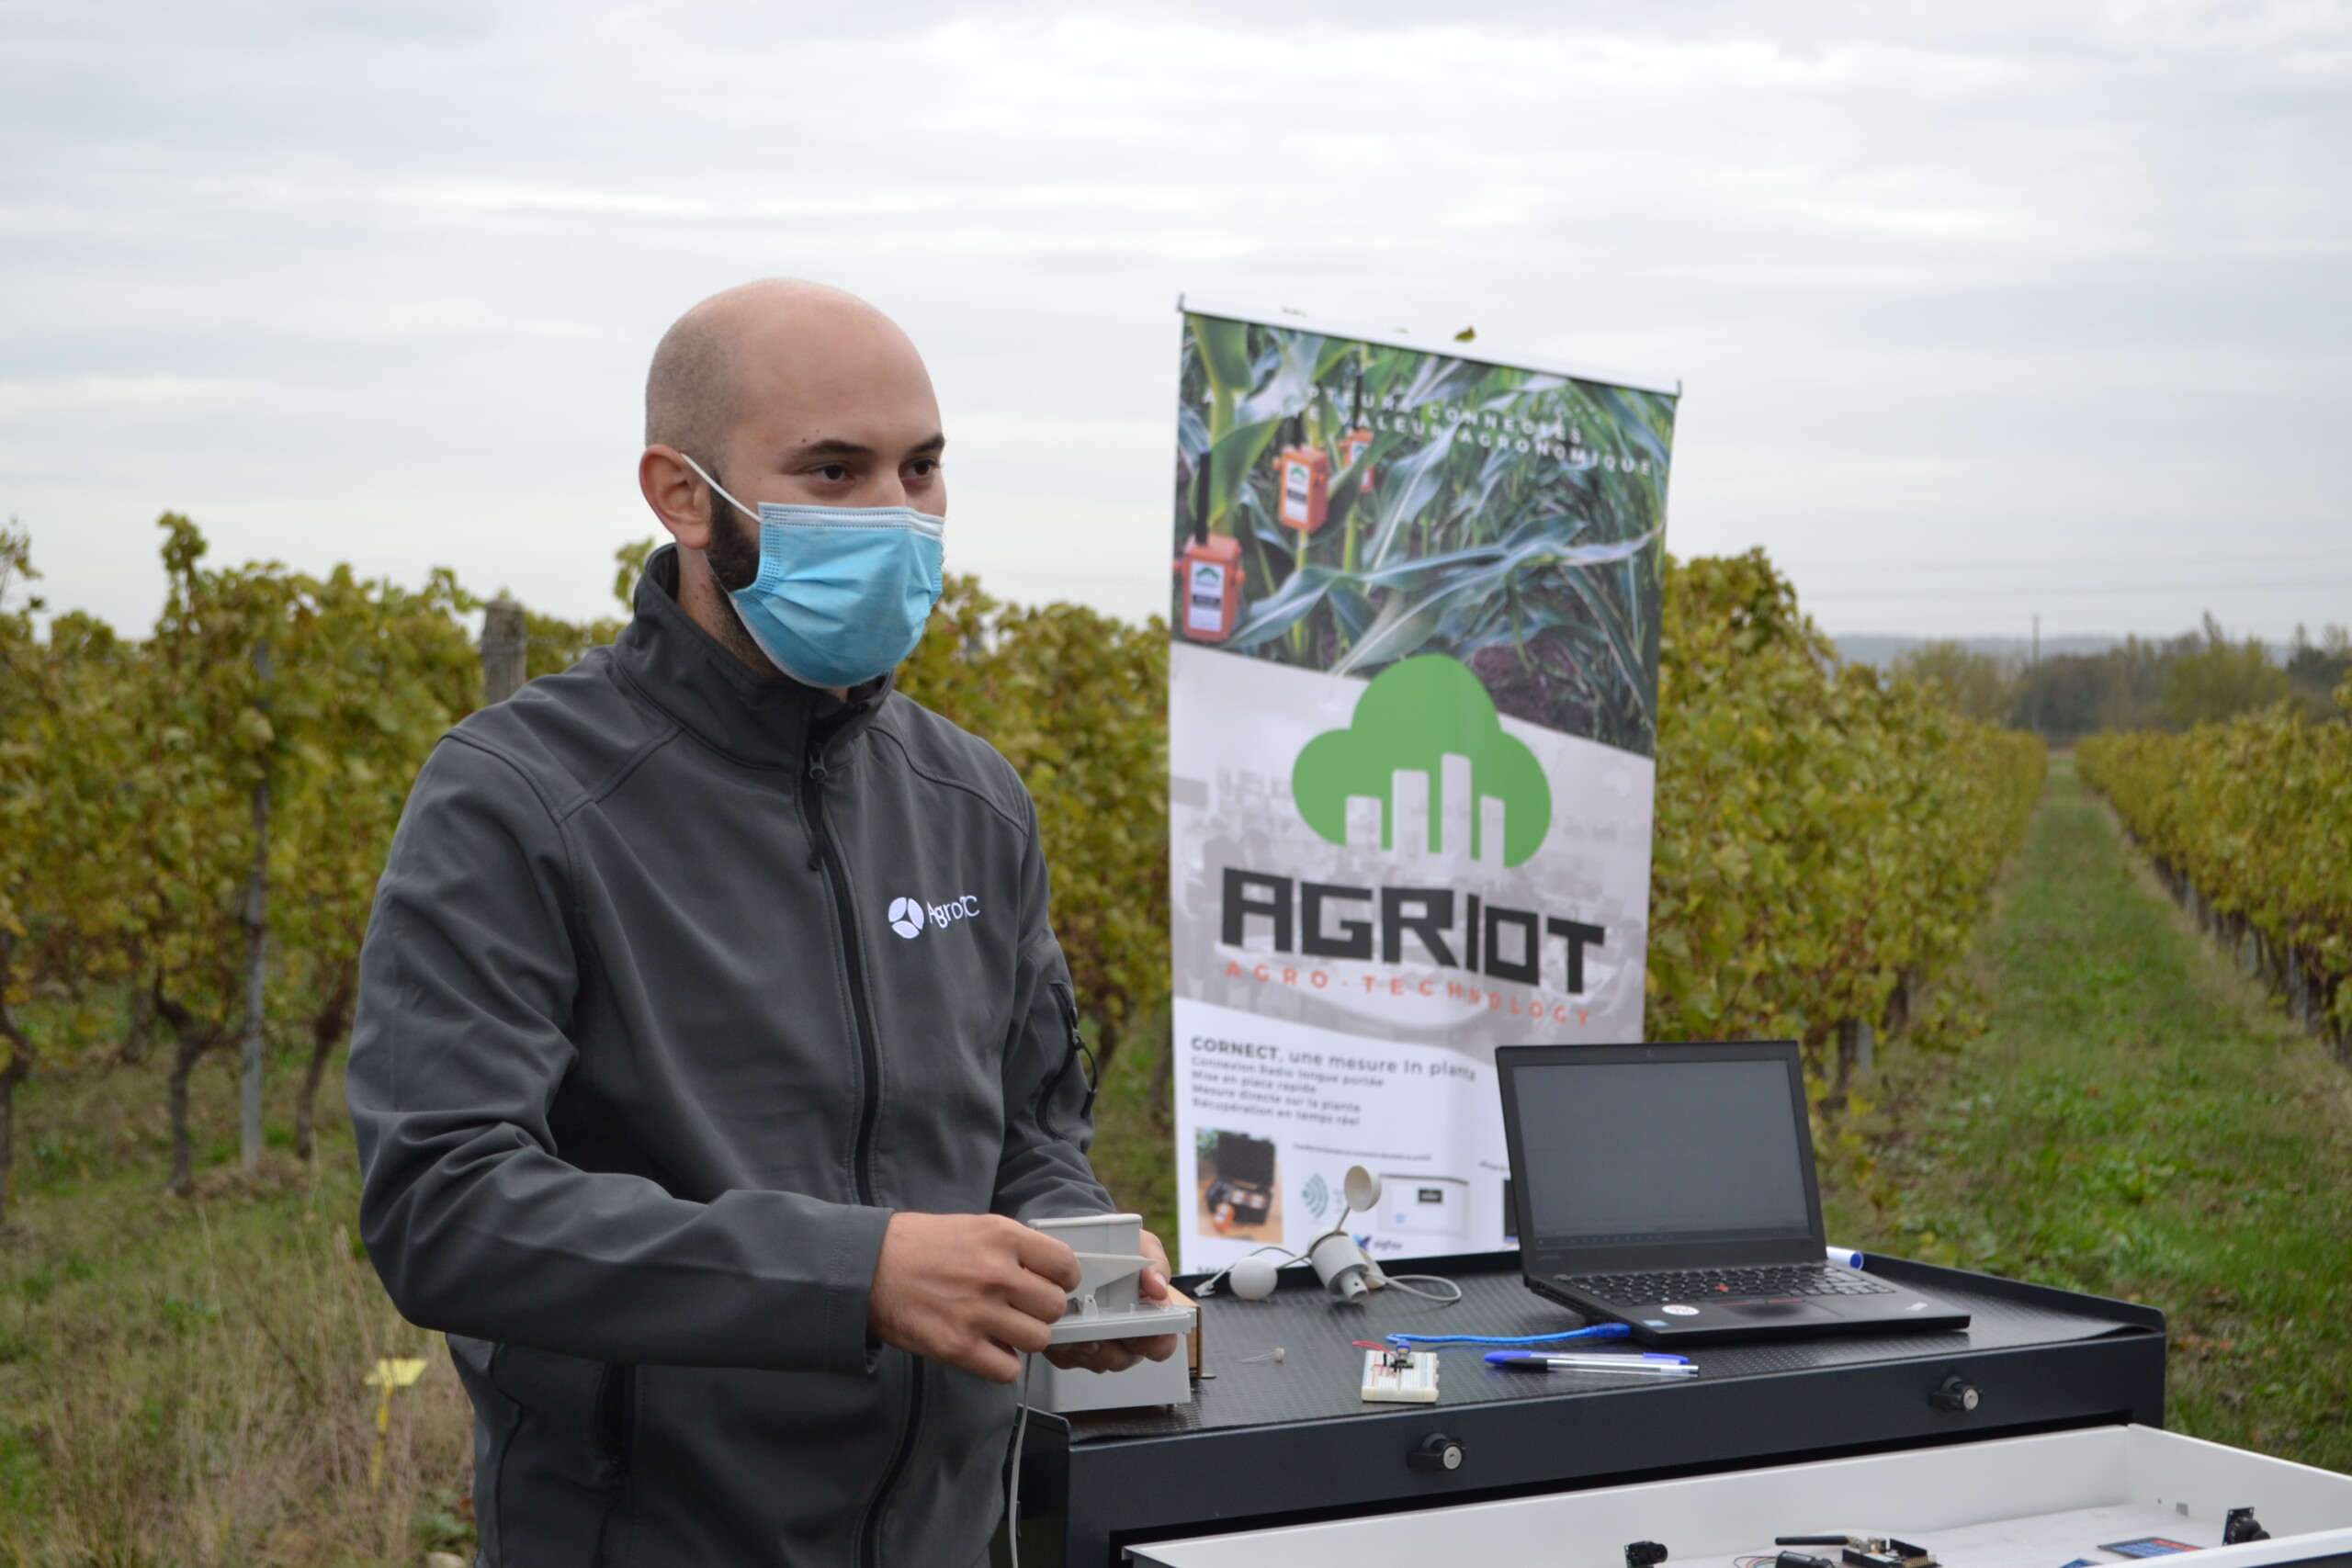 Workshop in the field : provider explaining precision farming solution to farmers and advisors